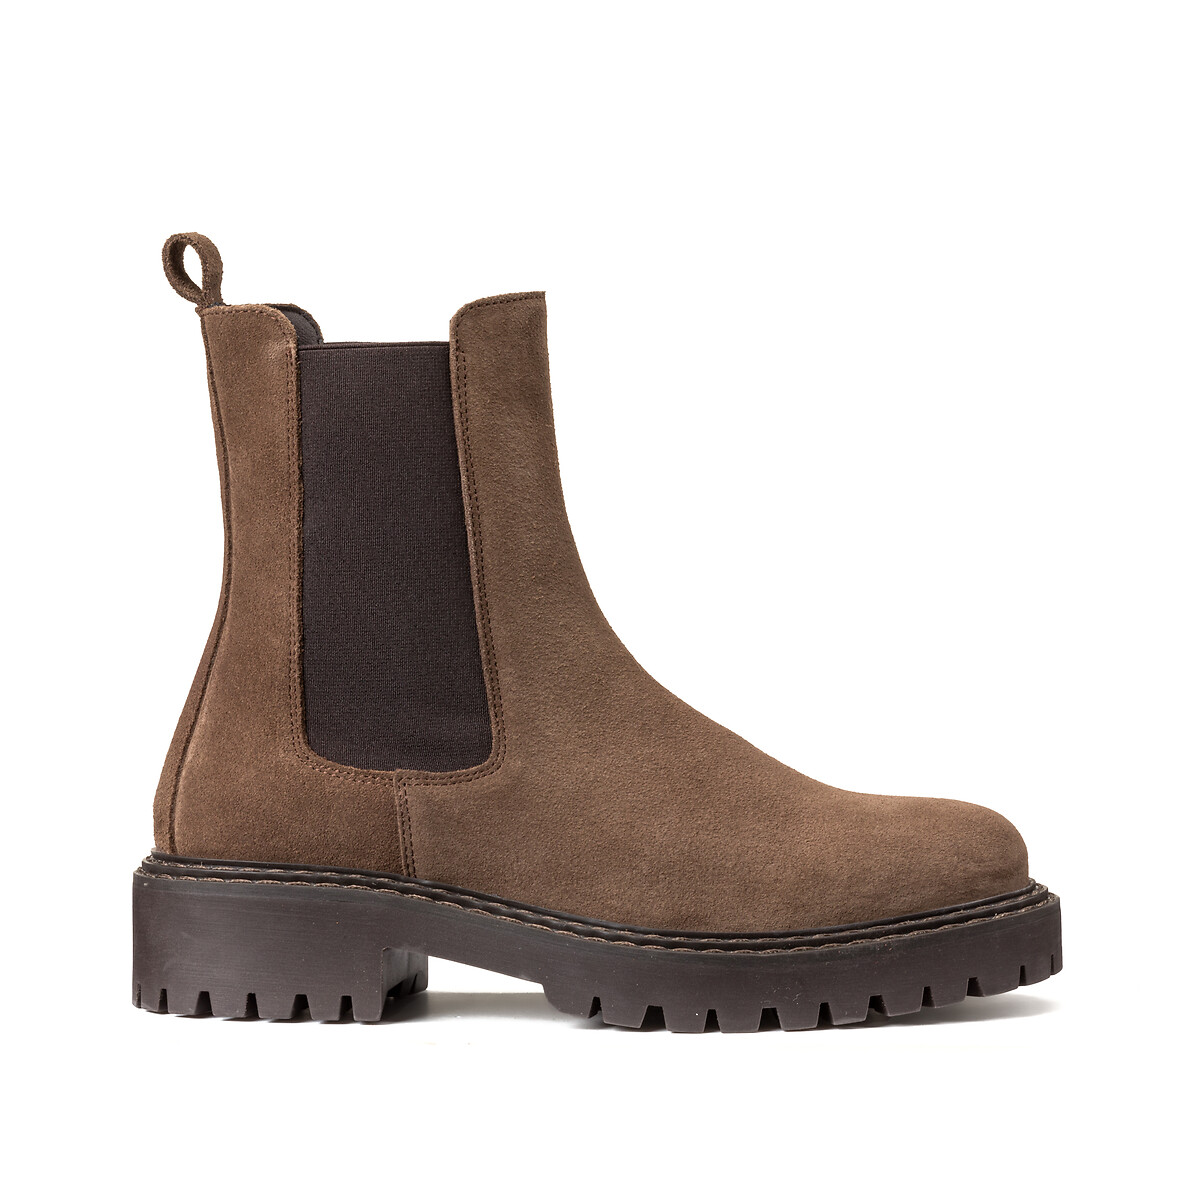 Suede chelsea boots, made in europe, bronze, La Redoute Collections ...